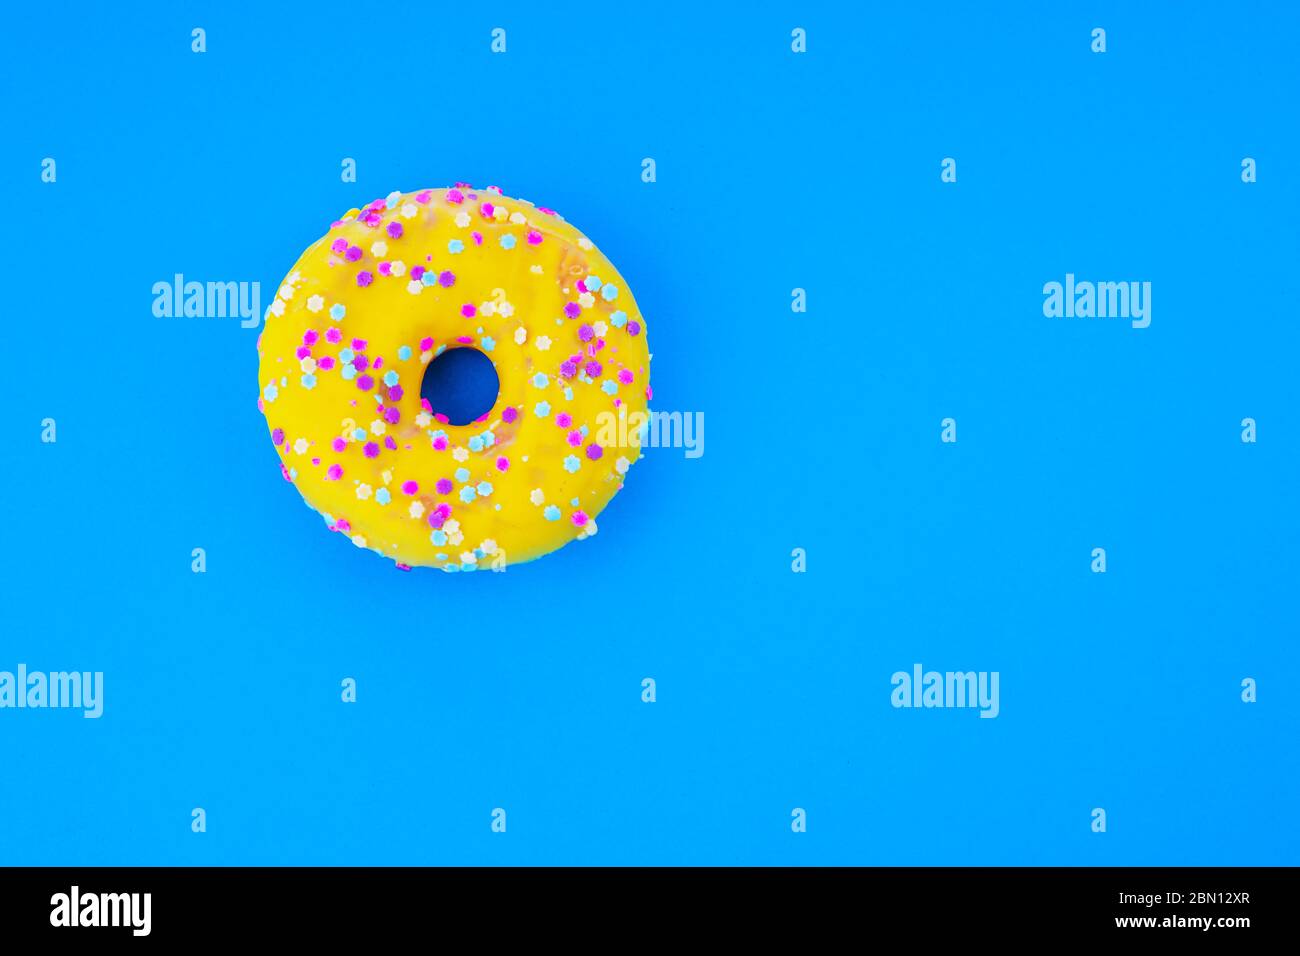 Yummy yellow donut isolated over blue background. Stock Photo